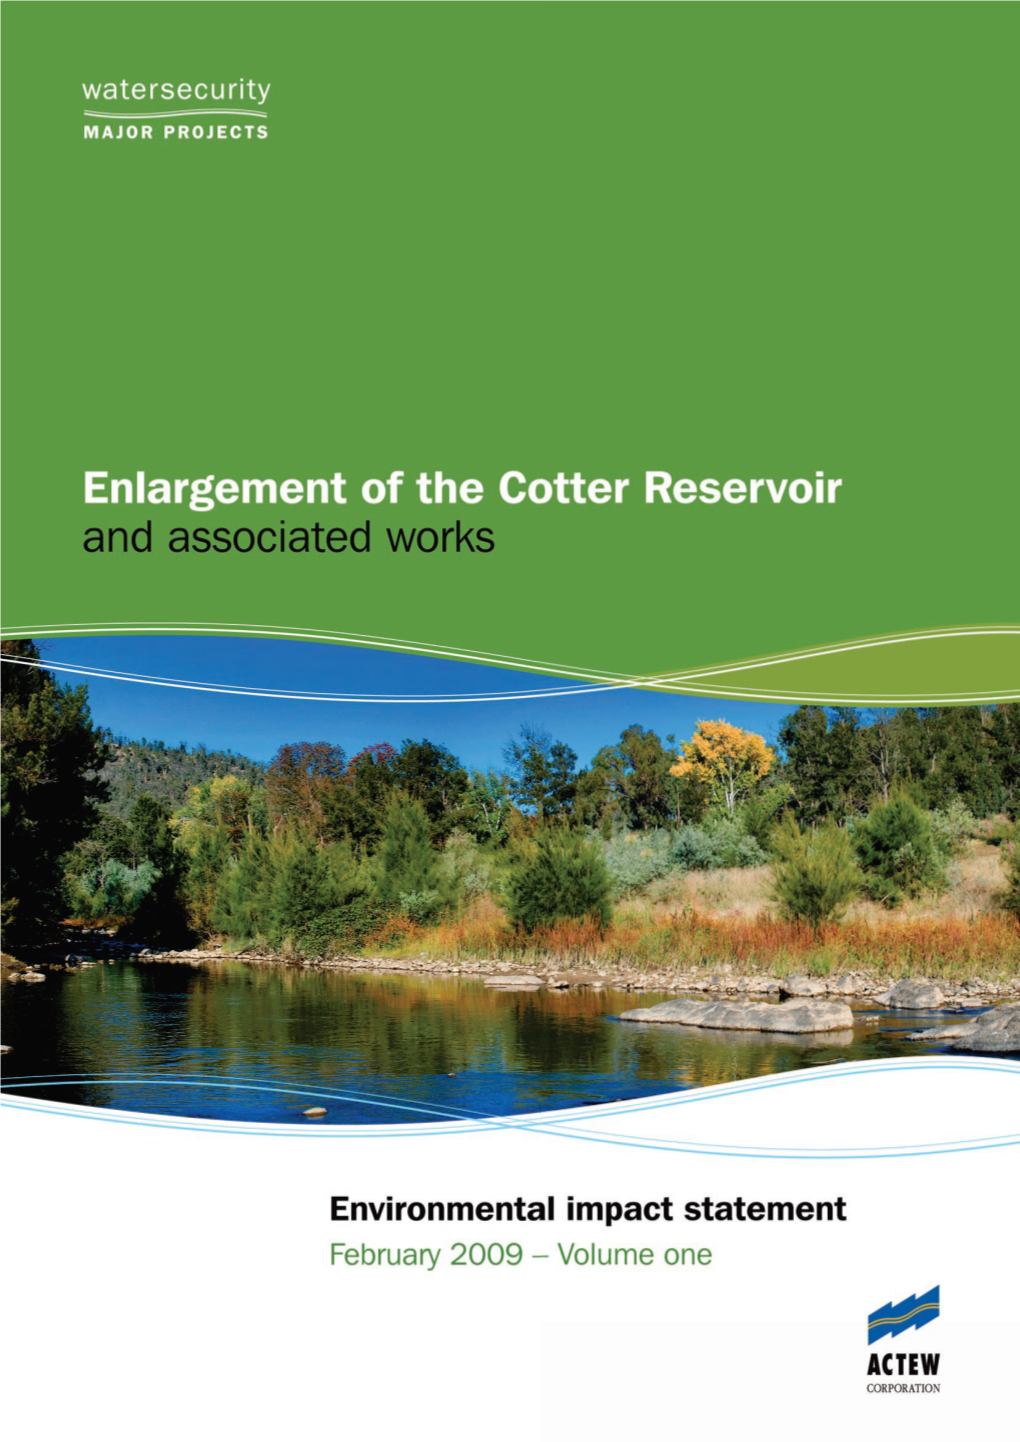 Enlargement of the Cotter Reservoir Is Needed to Deliver a More Secure Water Supply for the Canberra Region